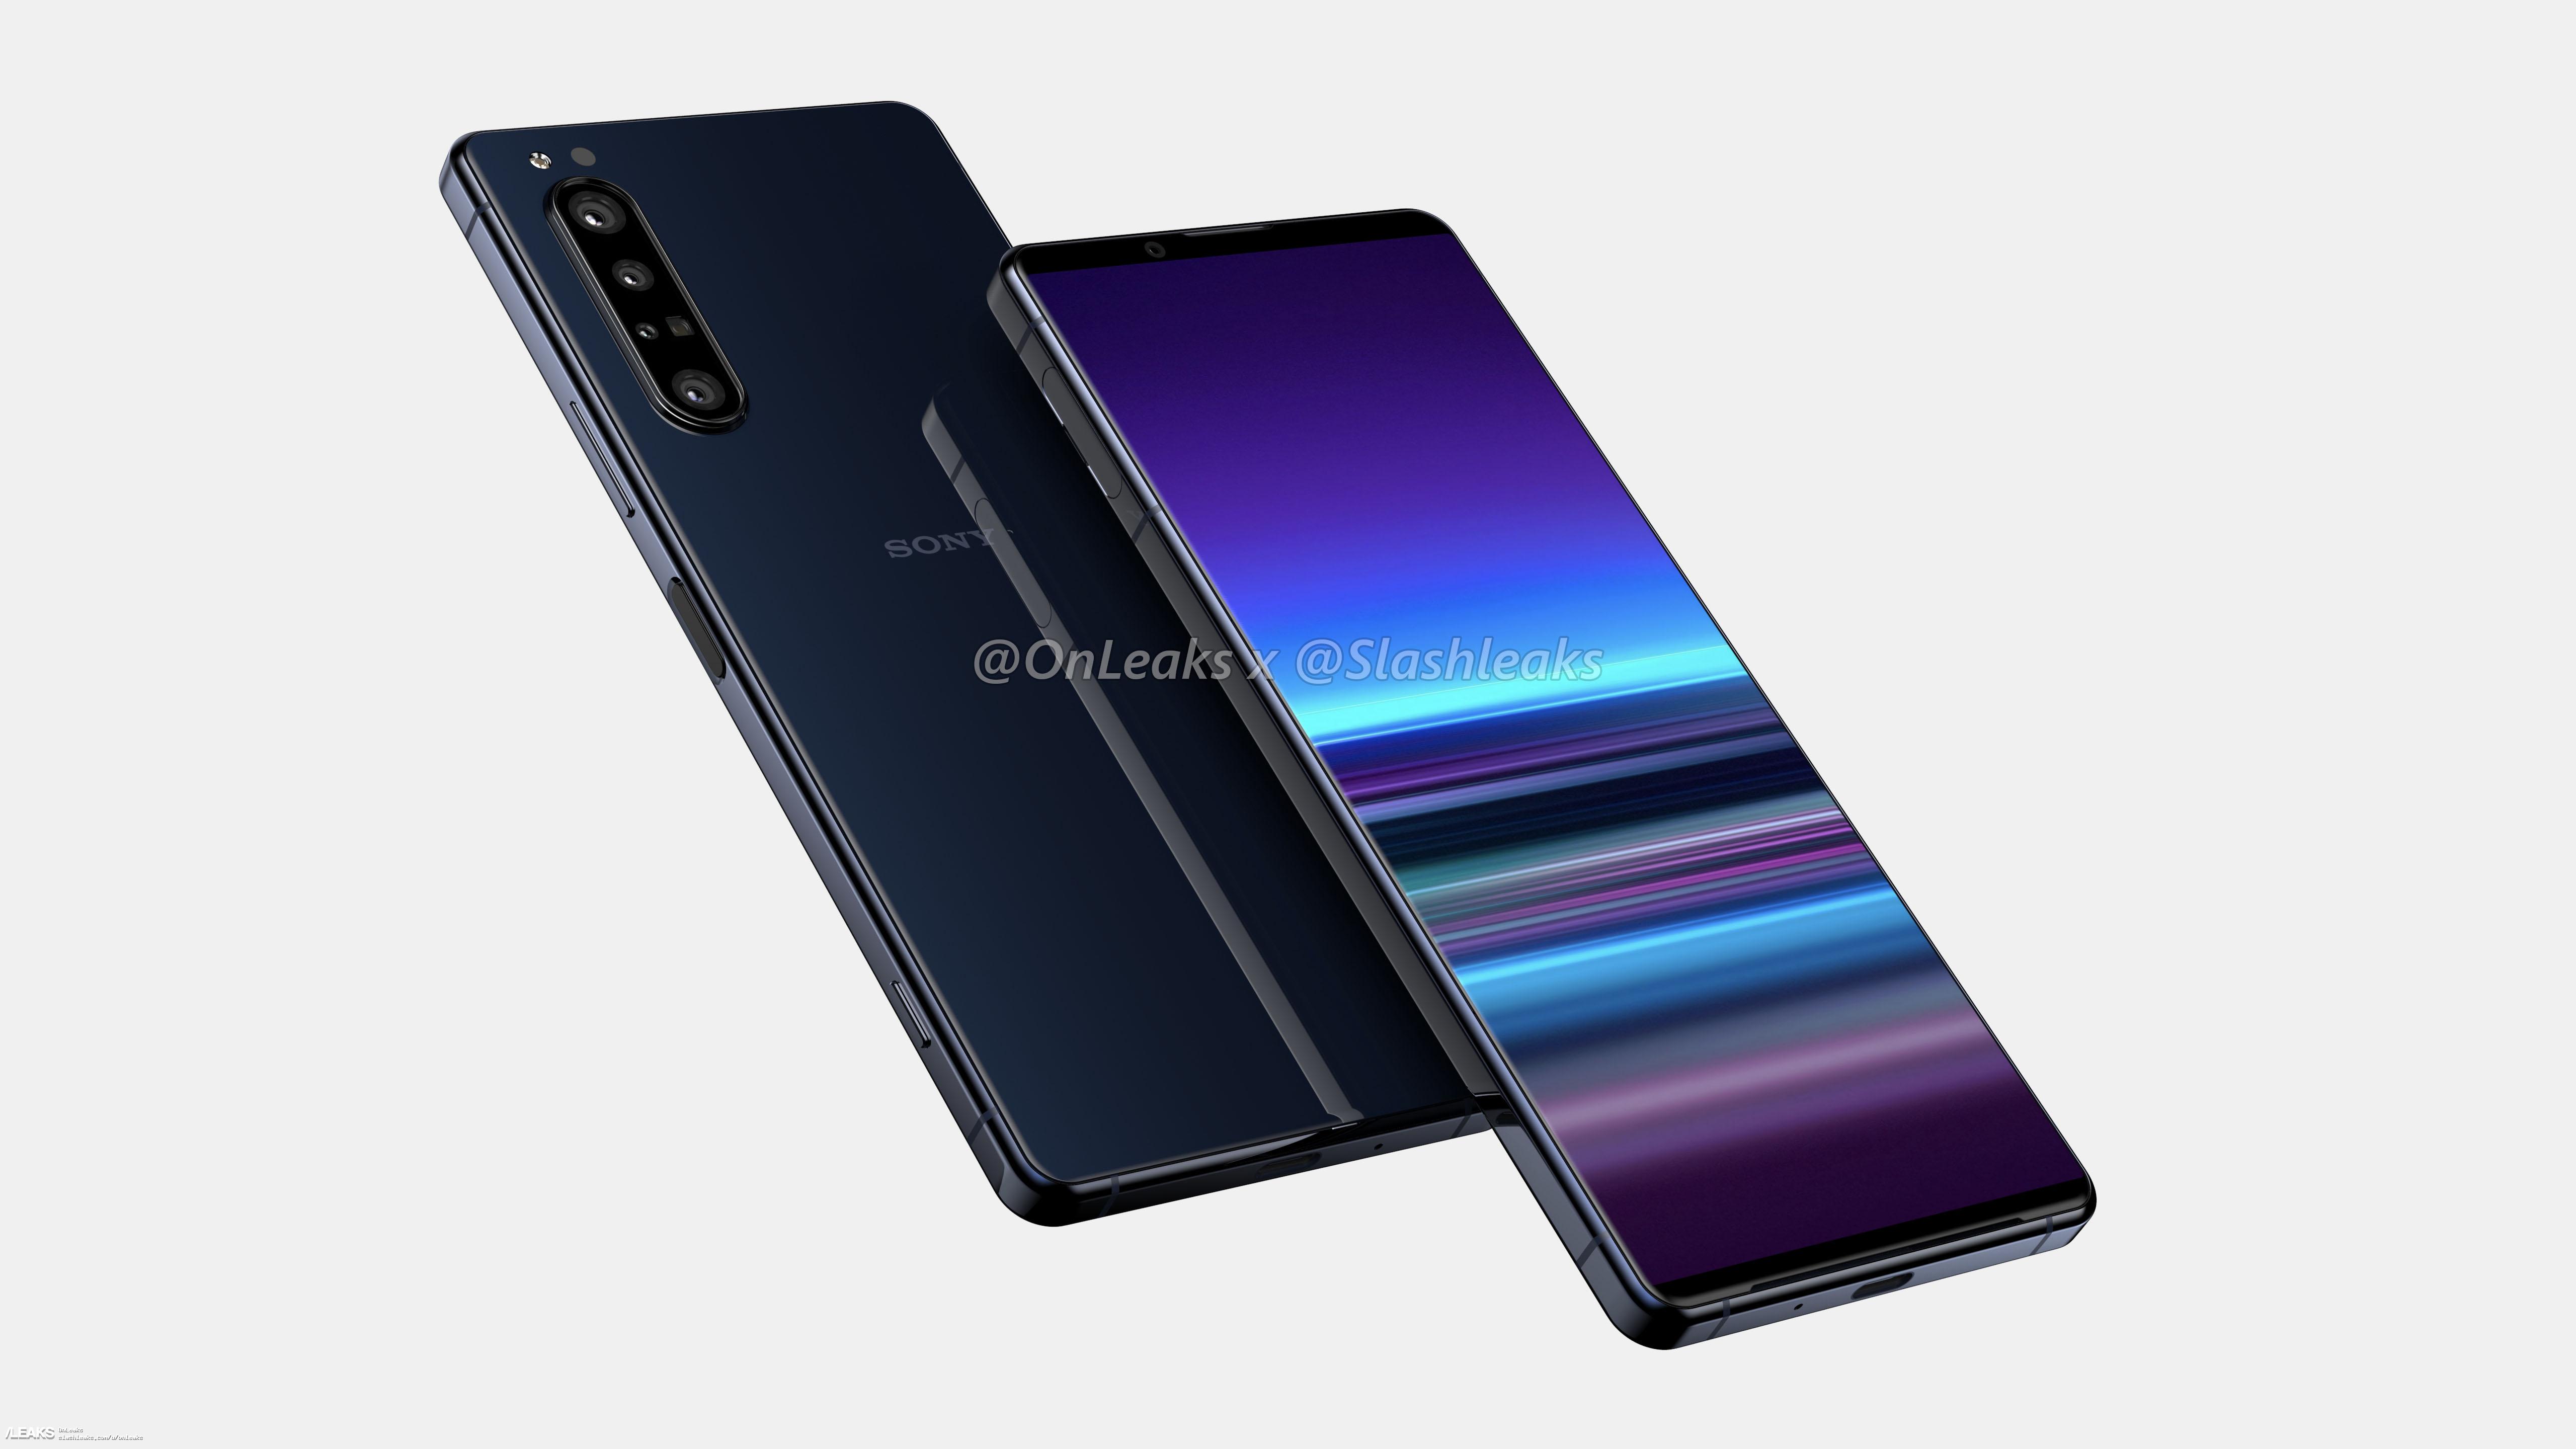 https://images.frandroid.com/wp-content/uploads/2020/01/sony-xperia-5-plus-360-video-5k-renders-dimensions-573.jpg